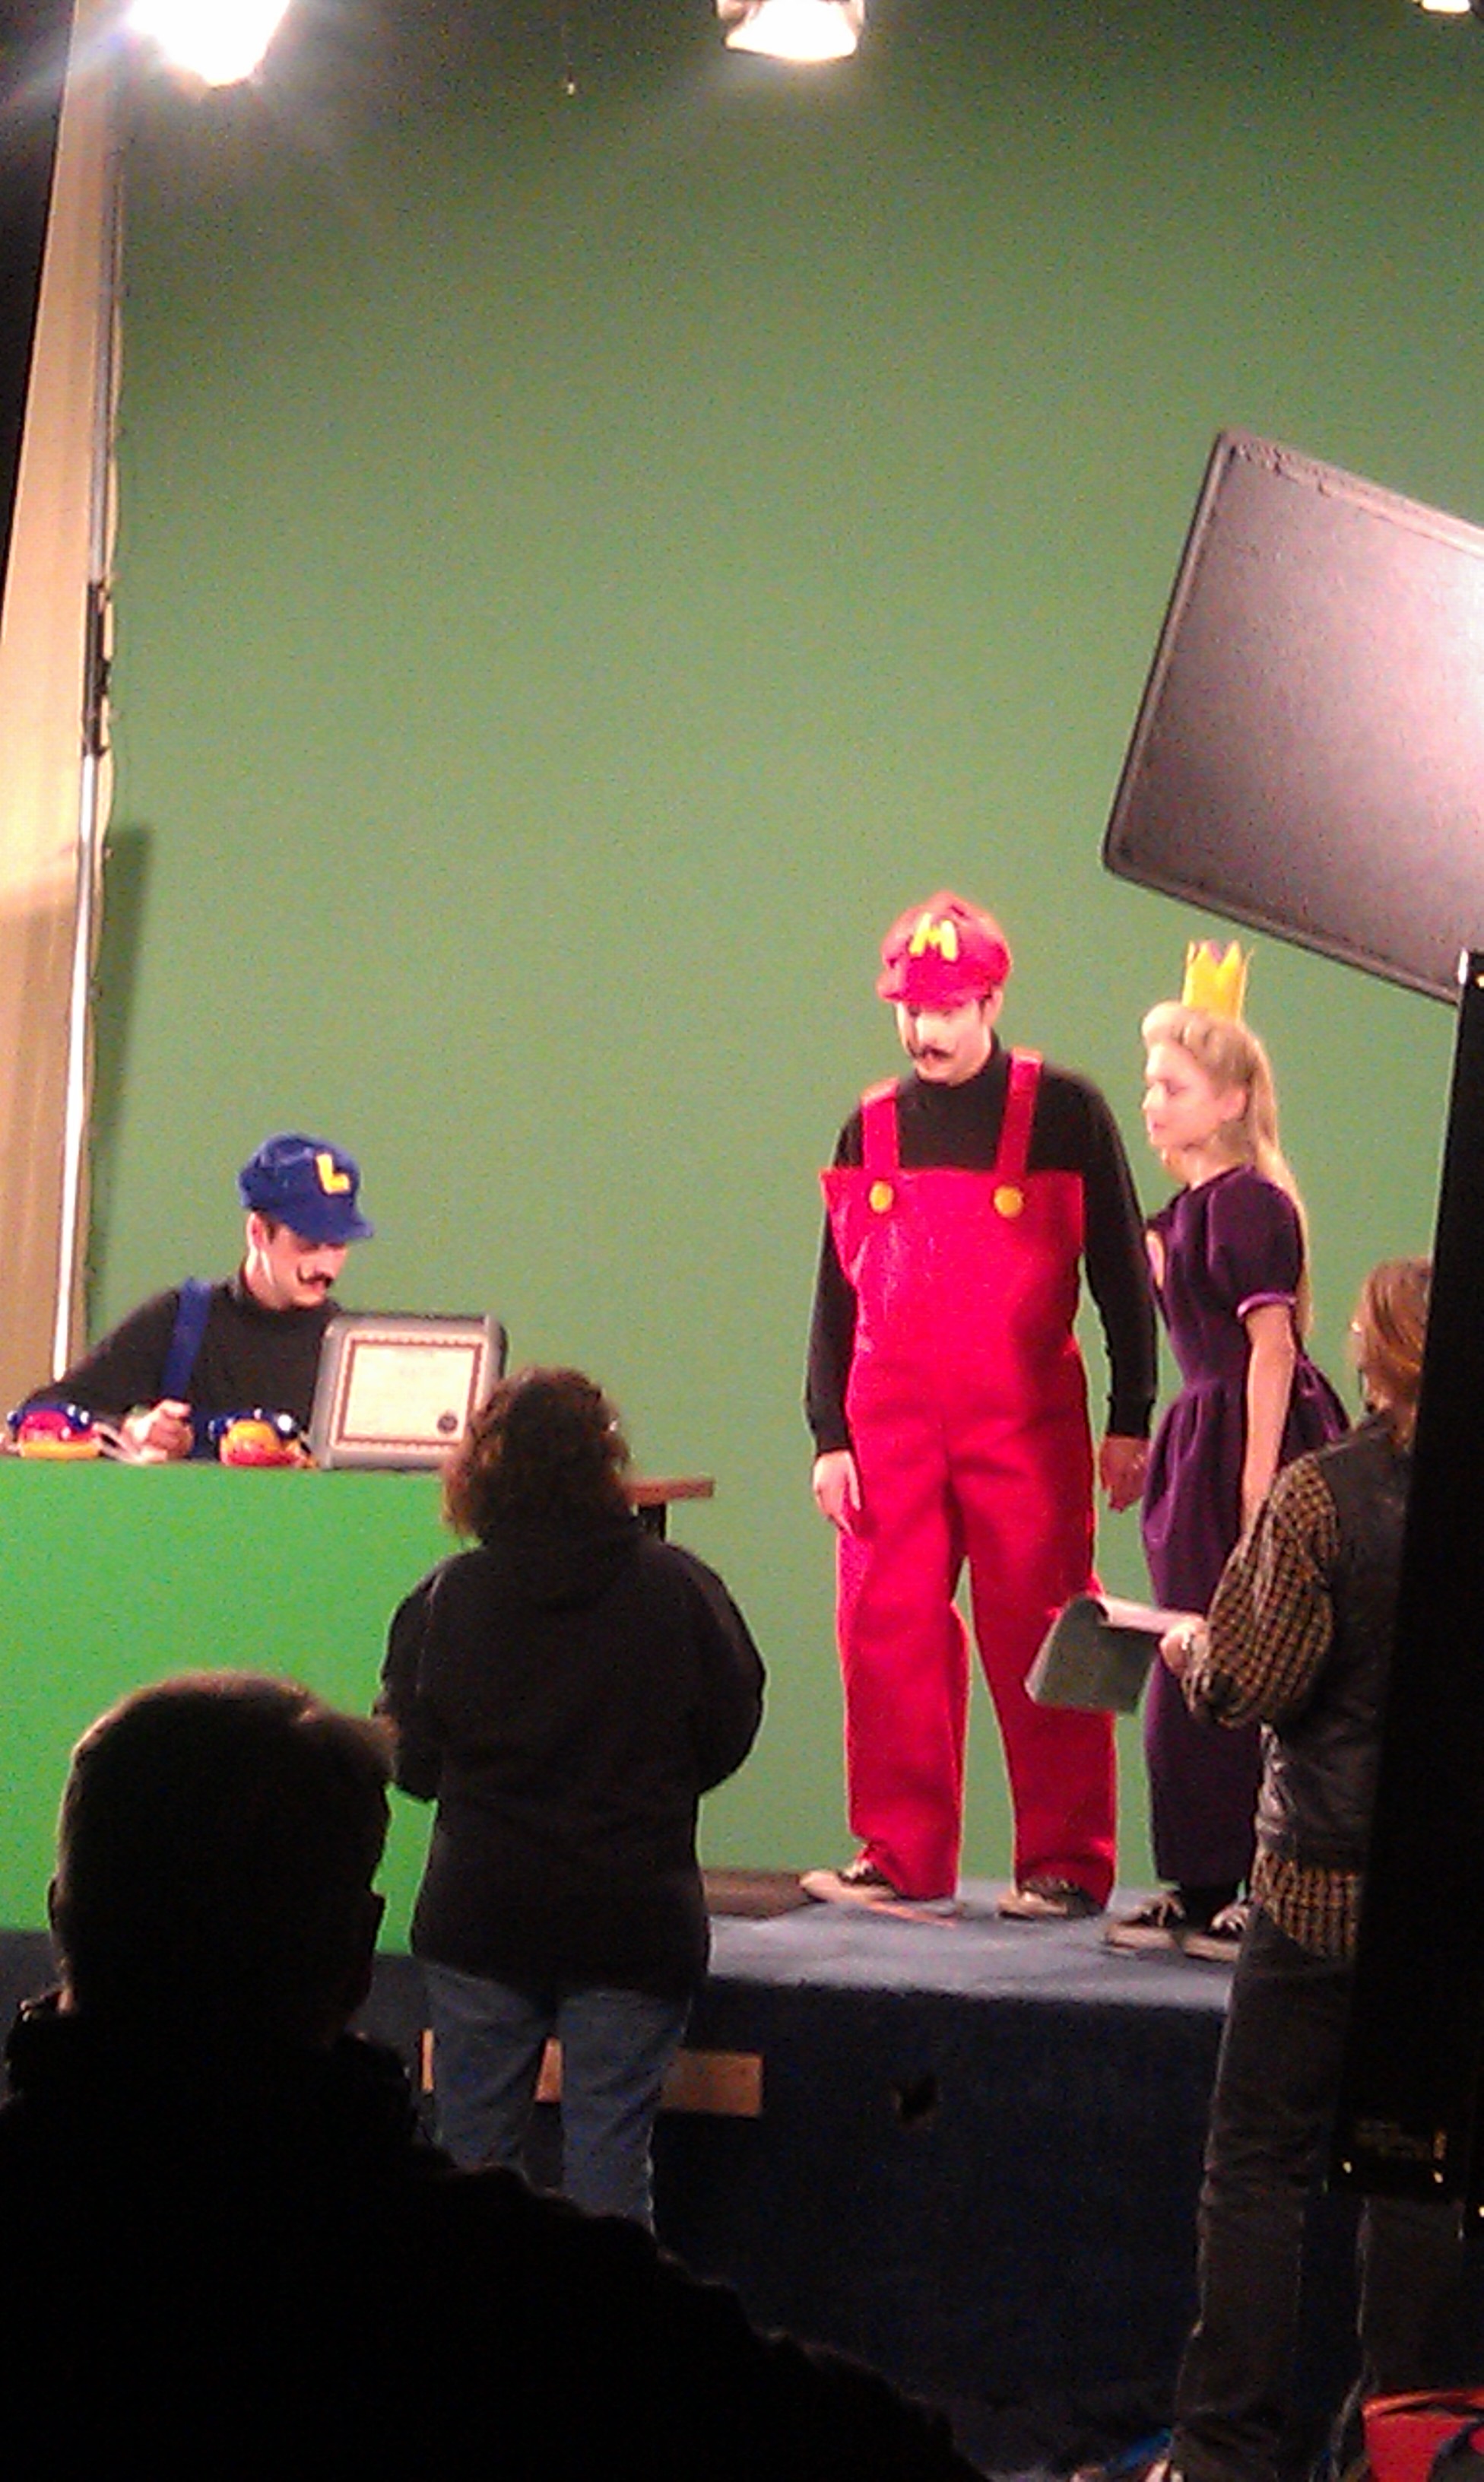 On the green screen 